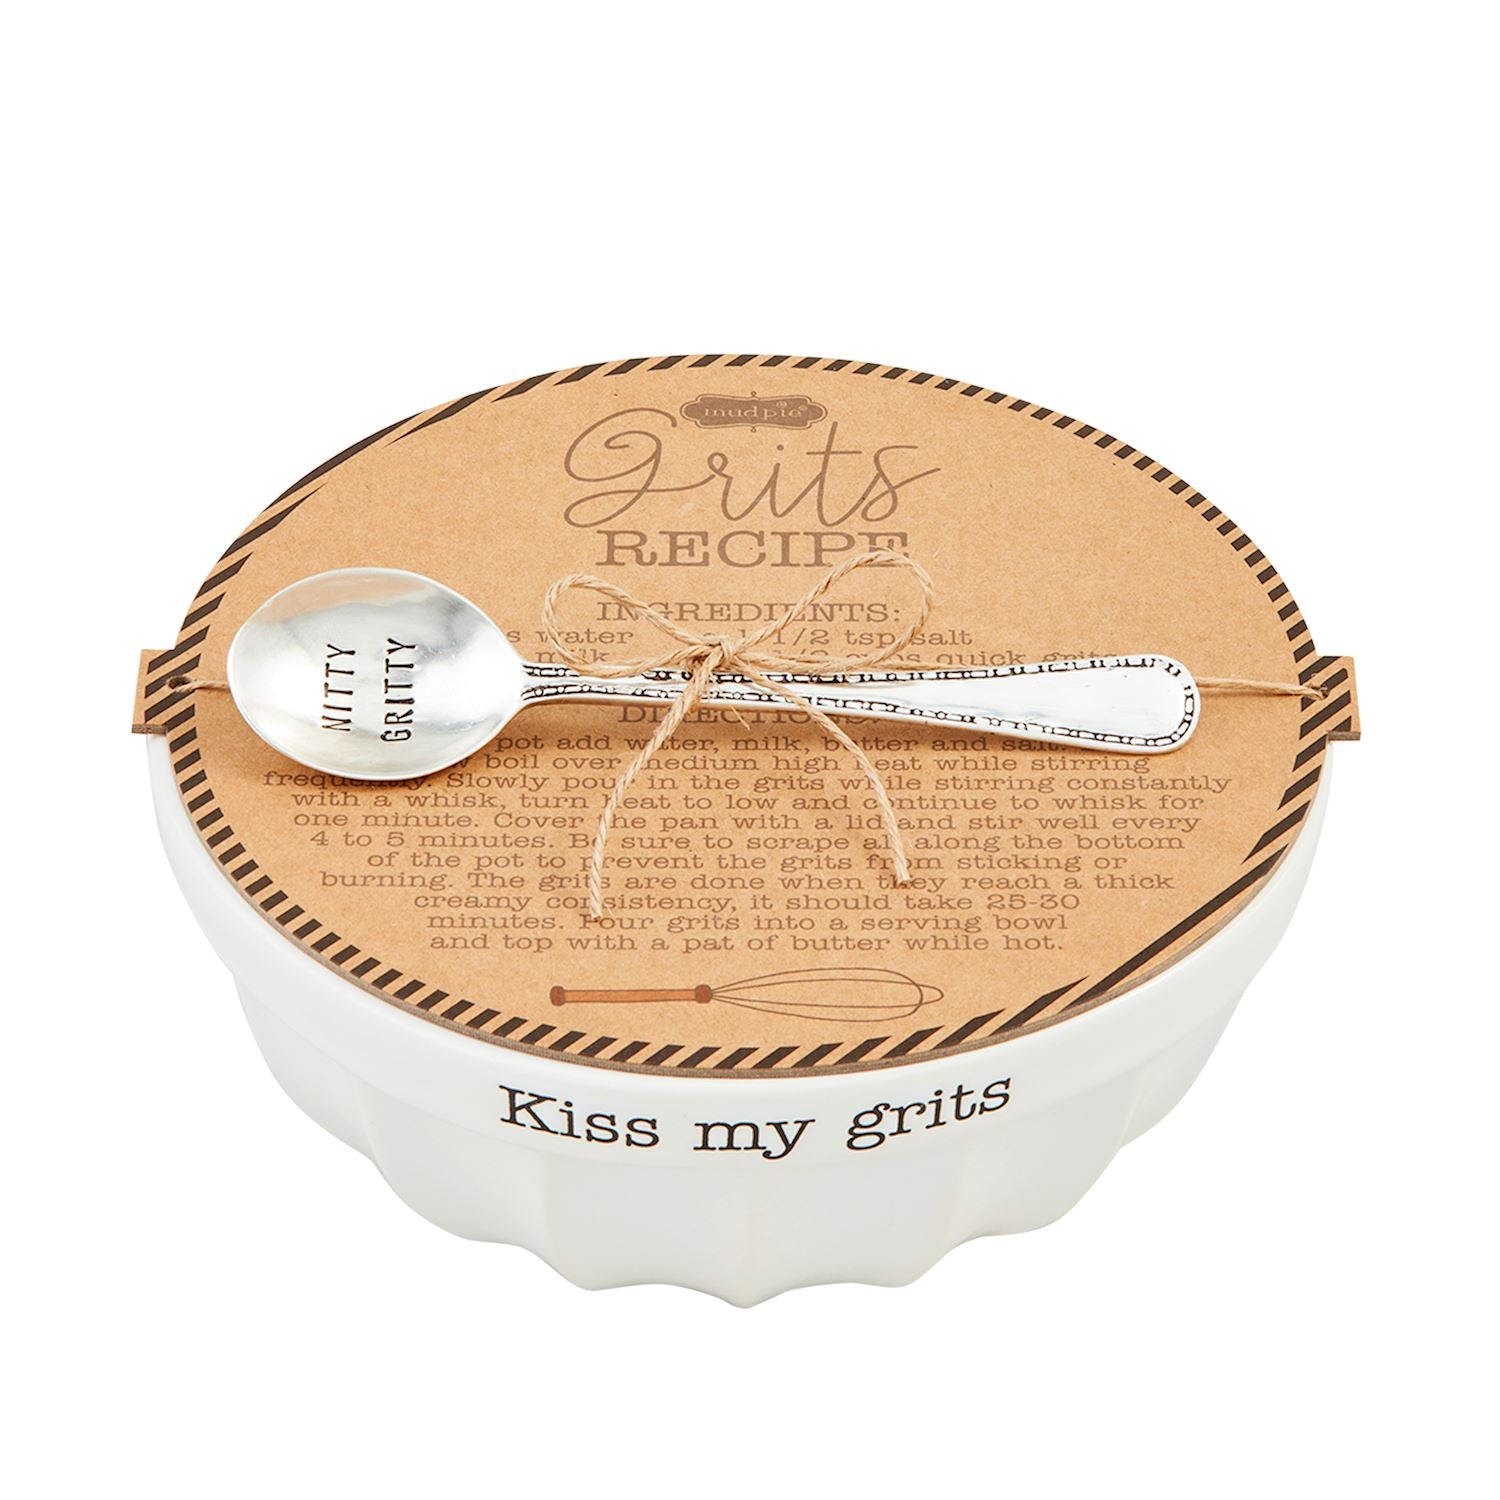 grits bowl with paper packaging and spoon tied on top, paper is printed with grits recipe.